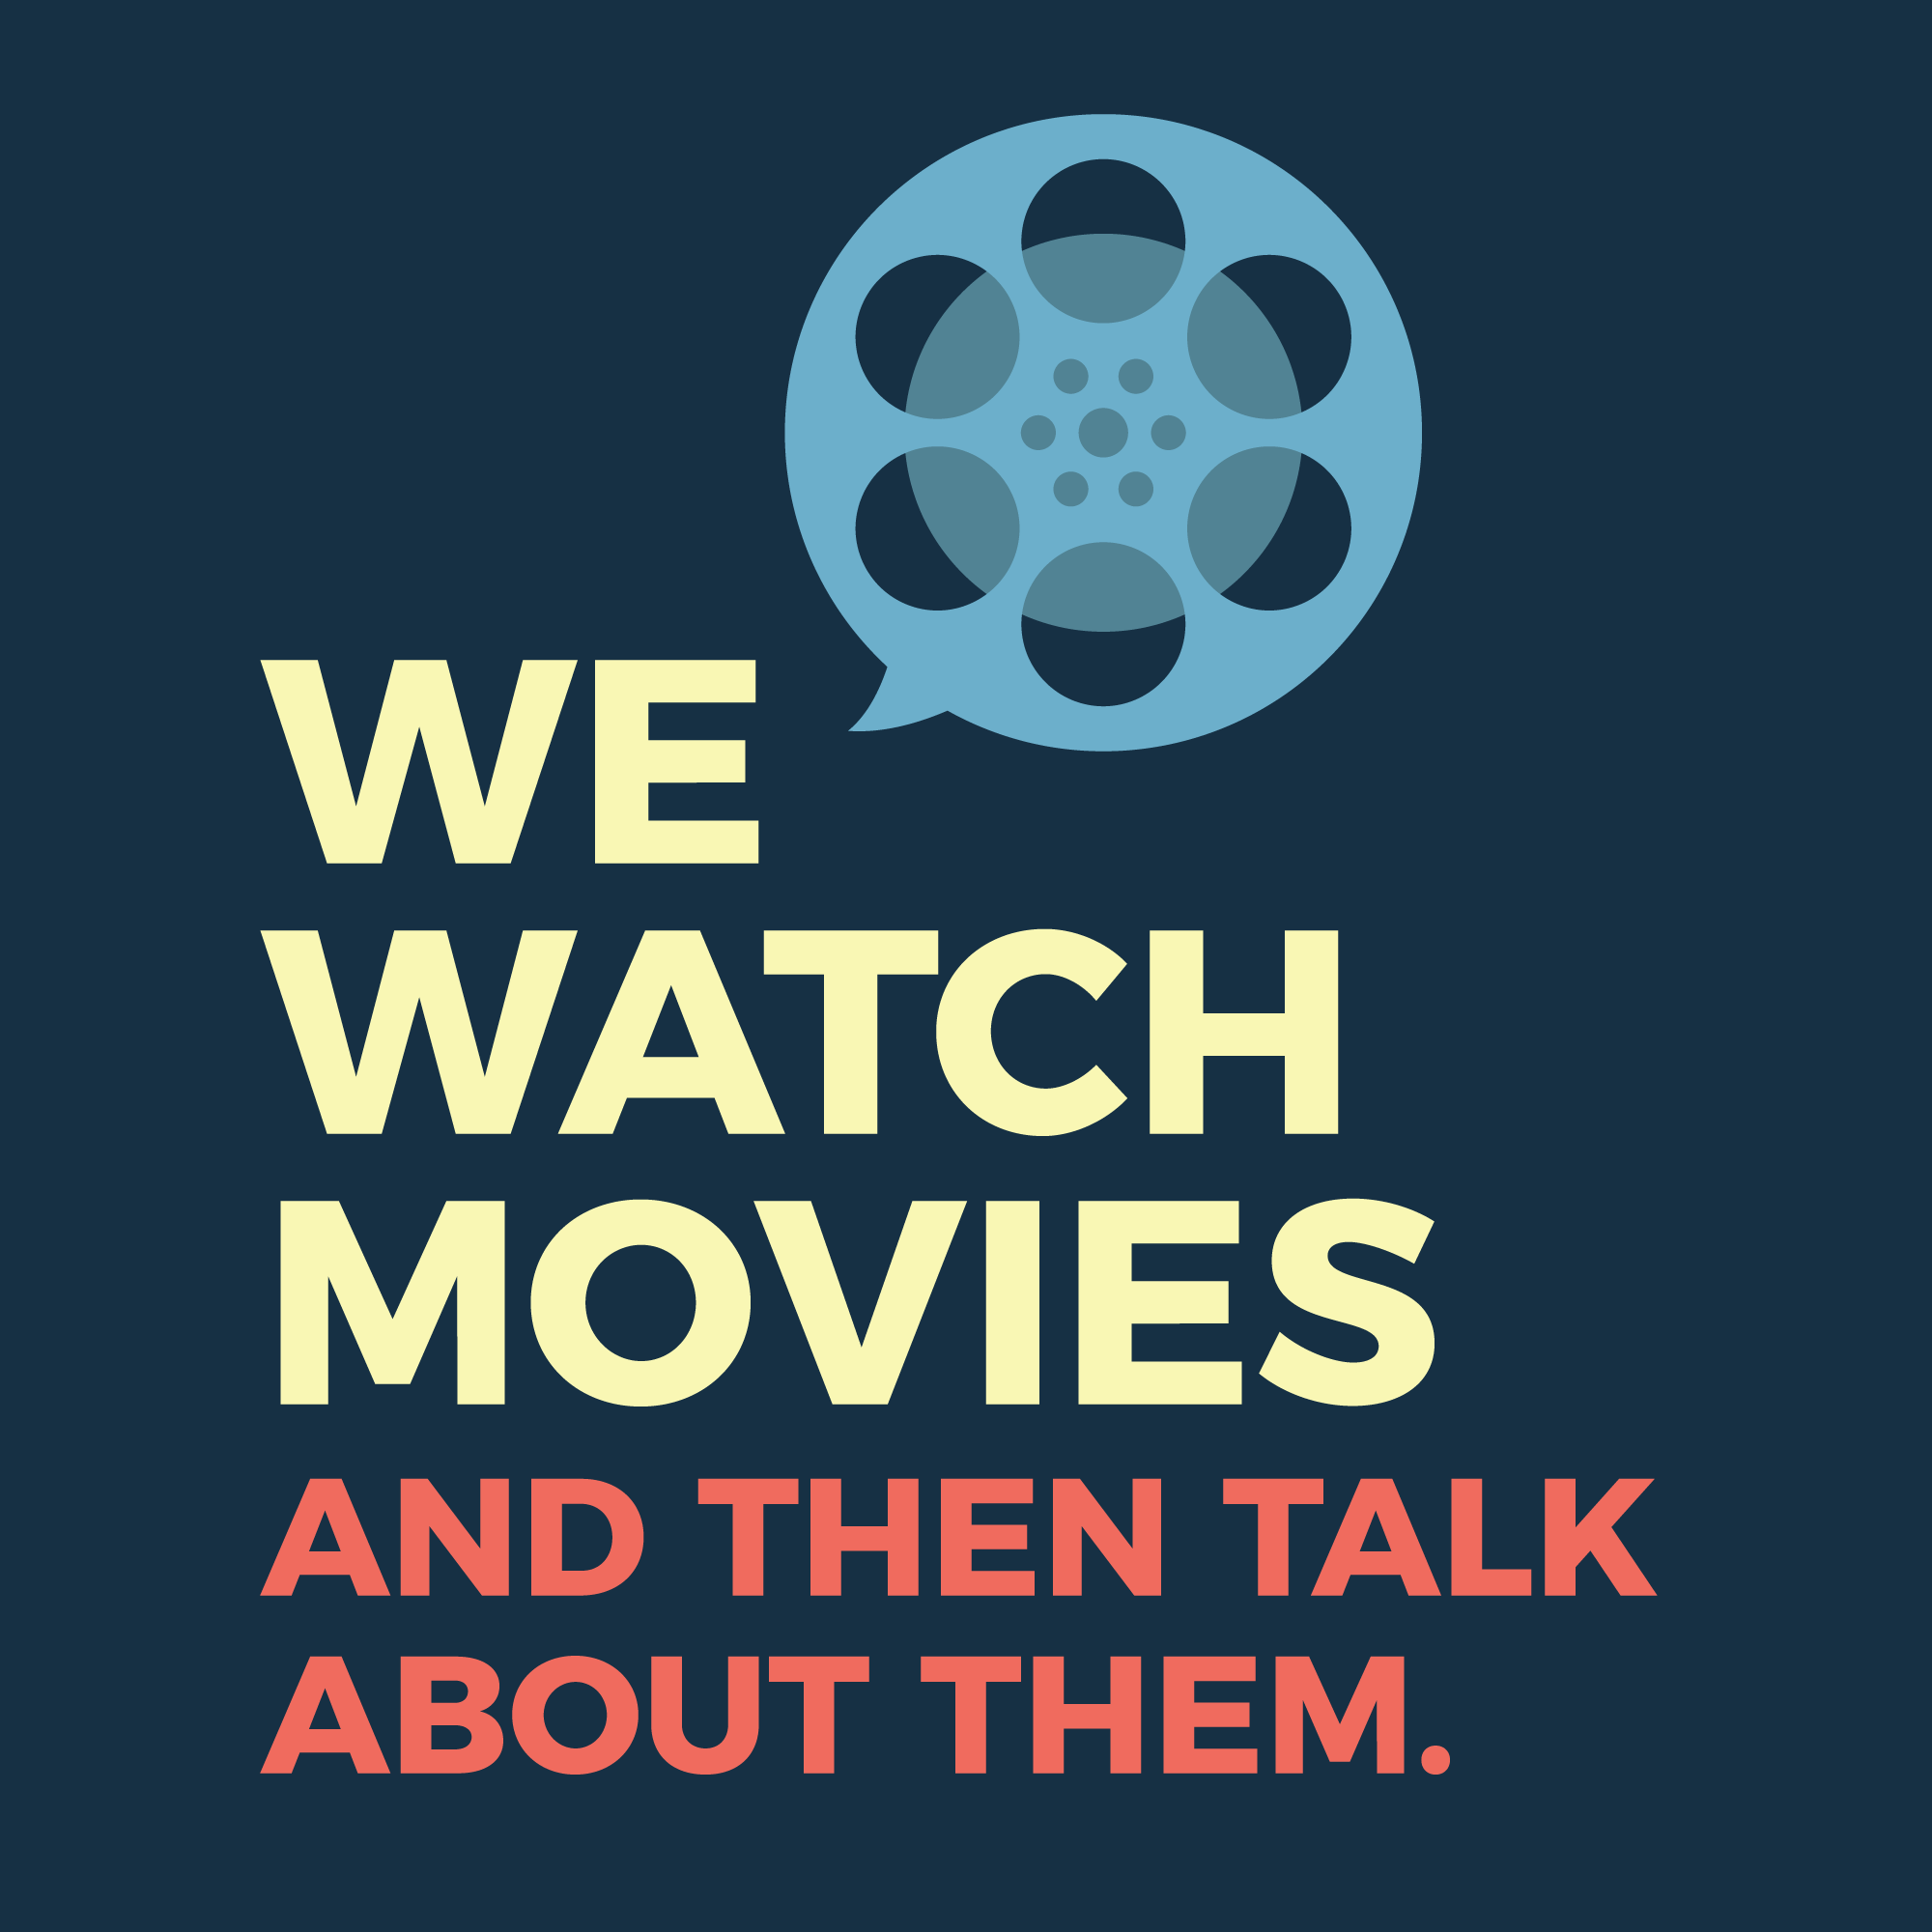 We Watch Movies and then Talk About Them